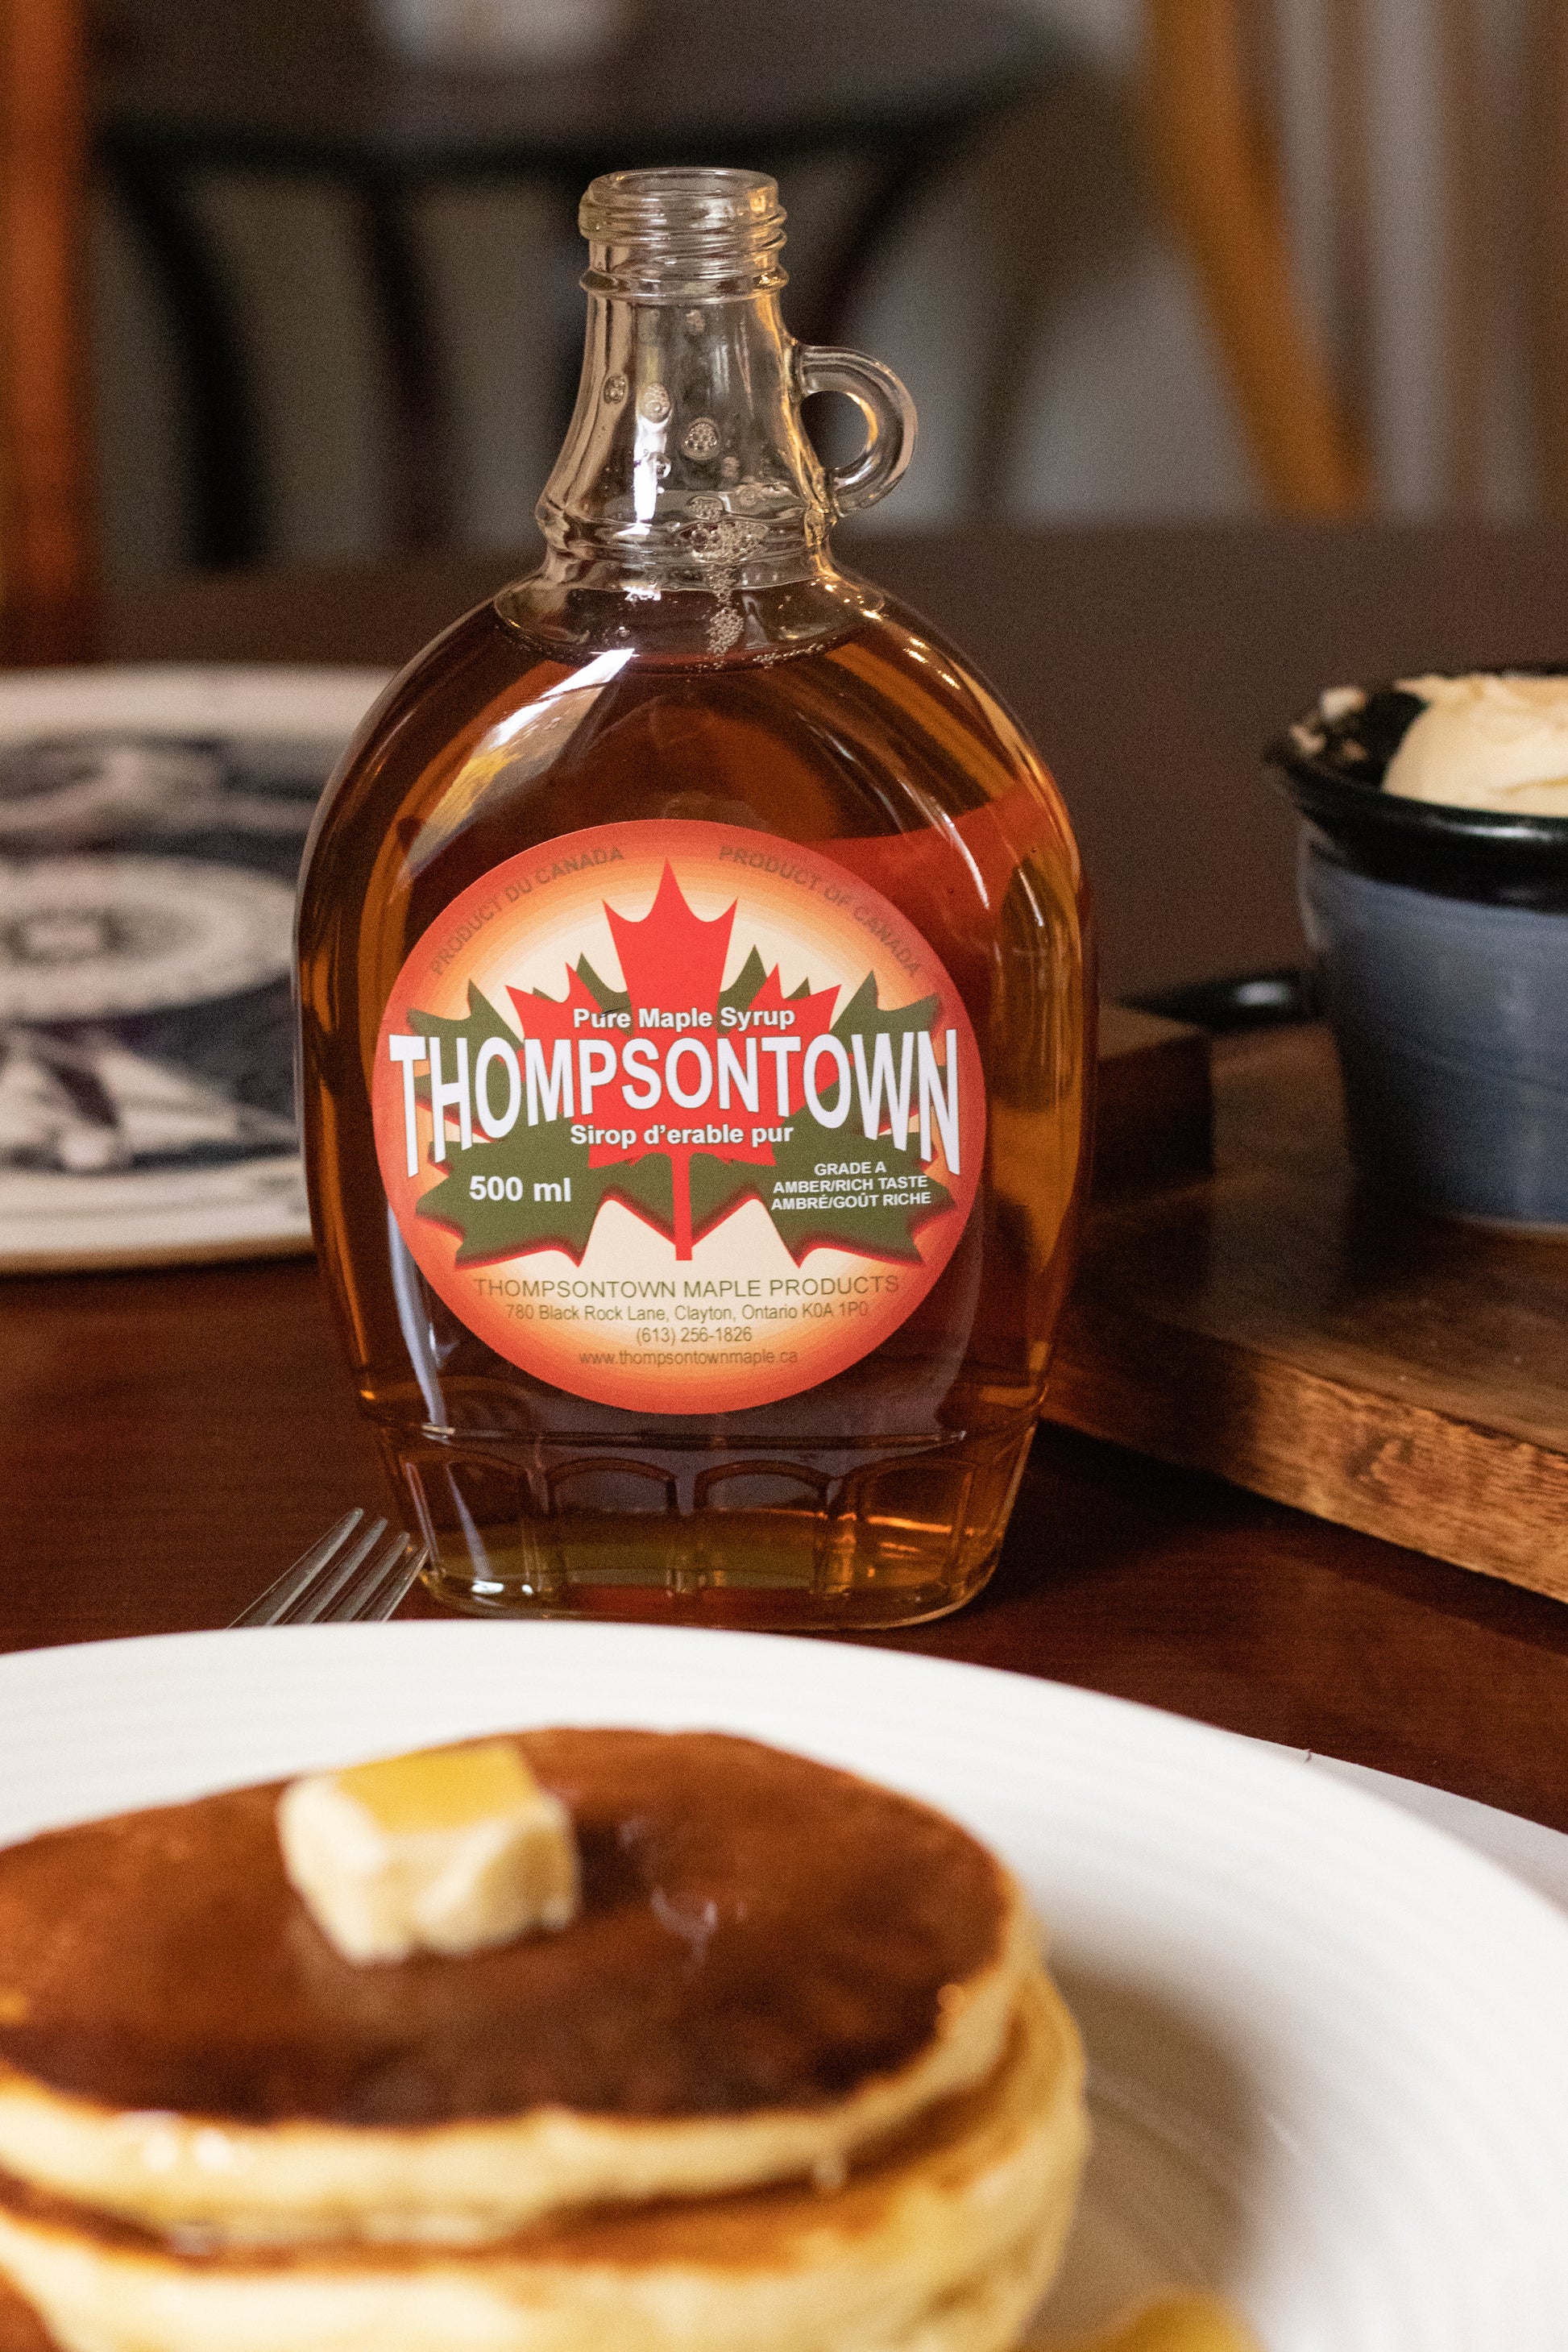 500 mL Glass Bottle of Pure Thompsontown Maple Syrup-Product of Ontario Canada